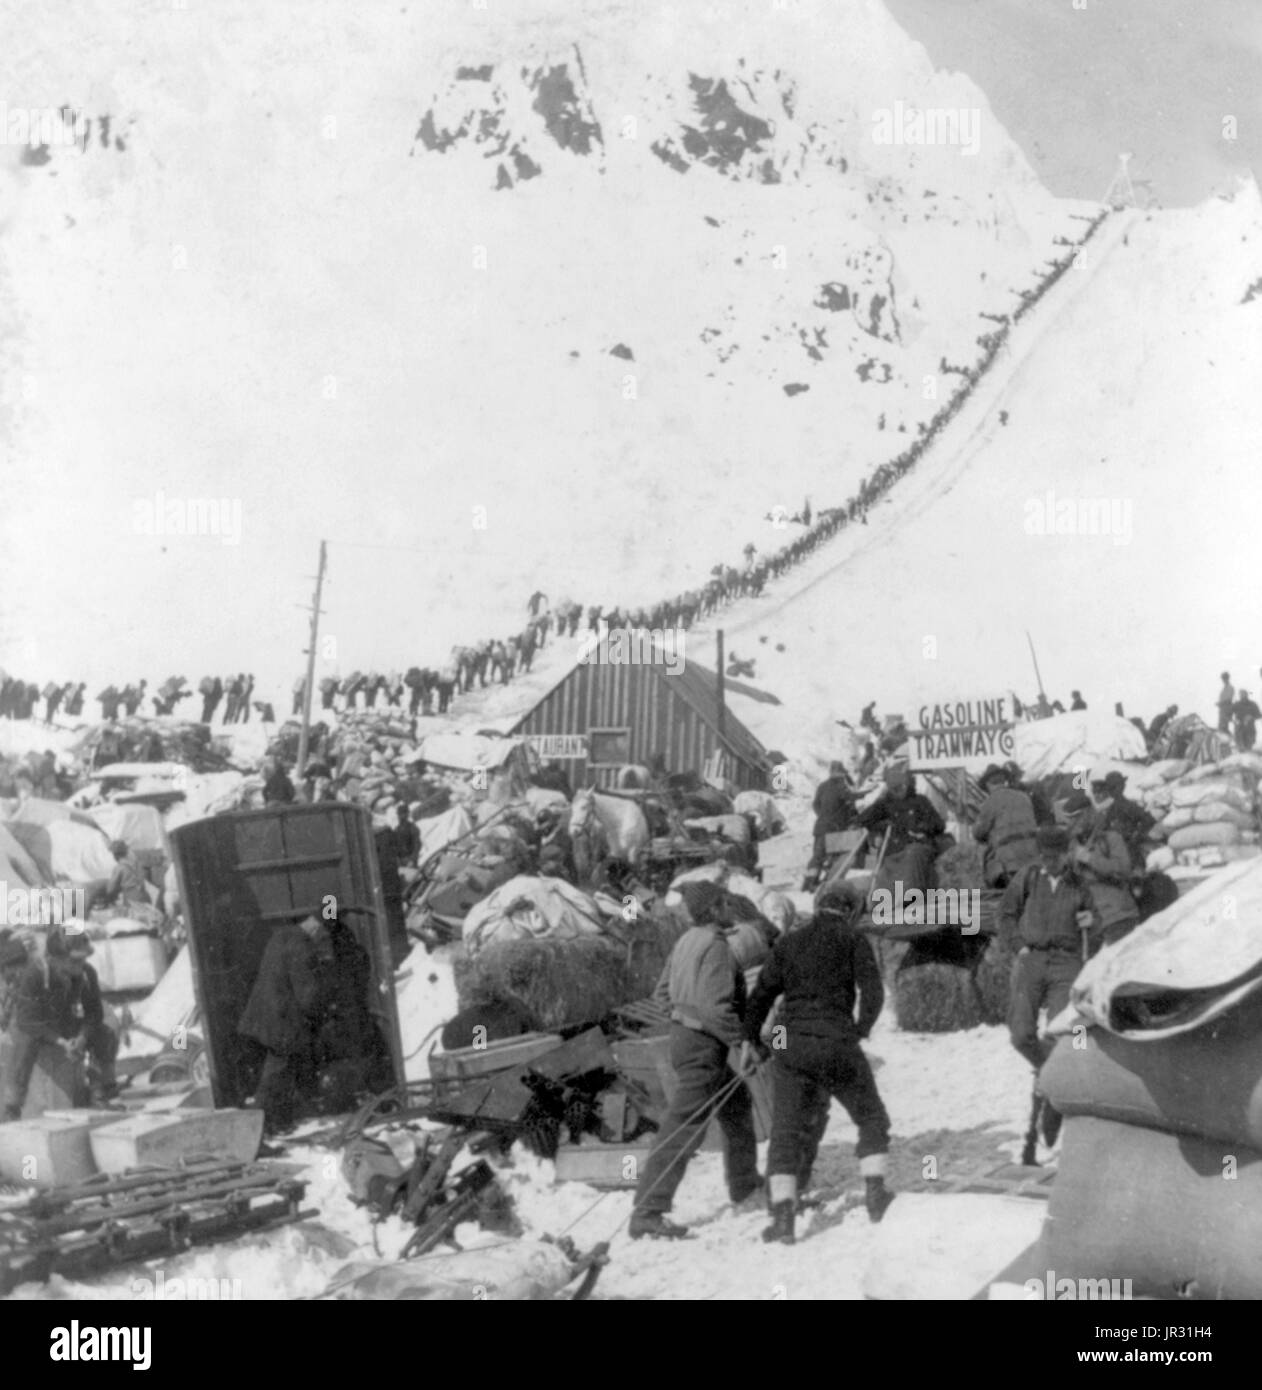 Bound for the Klondike Gold Fields, Chilcoot Pass, Alaska. The Klondike Gold Rush was a migration by an estimated 100,000 prospectors to the Klondike region of the Yukon between 1896-99. Gold was discovered by local miners on August 16, 1896 and, when news reached Seattle and San Francisco, it triggered a stampede of would-be prospectors. To reach the gold fields most took the route through the ports of Dyea and Skagway in Alaska. Here, the Klondikers could follow either the Chilkoot or the White Pass trails to the Yukon River and sail down to the Klondike. Each of them was required to bring a Stock Photo